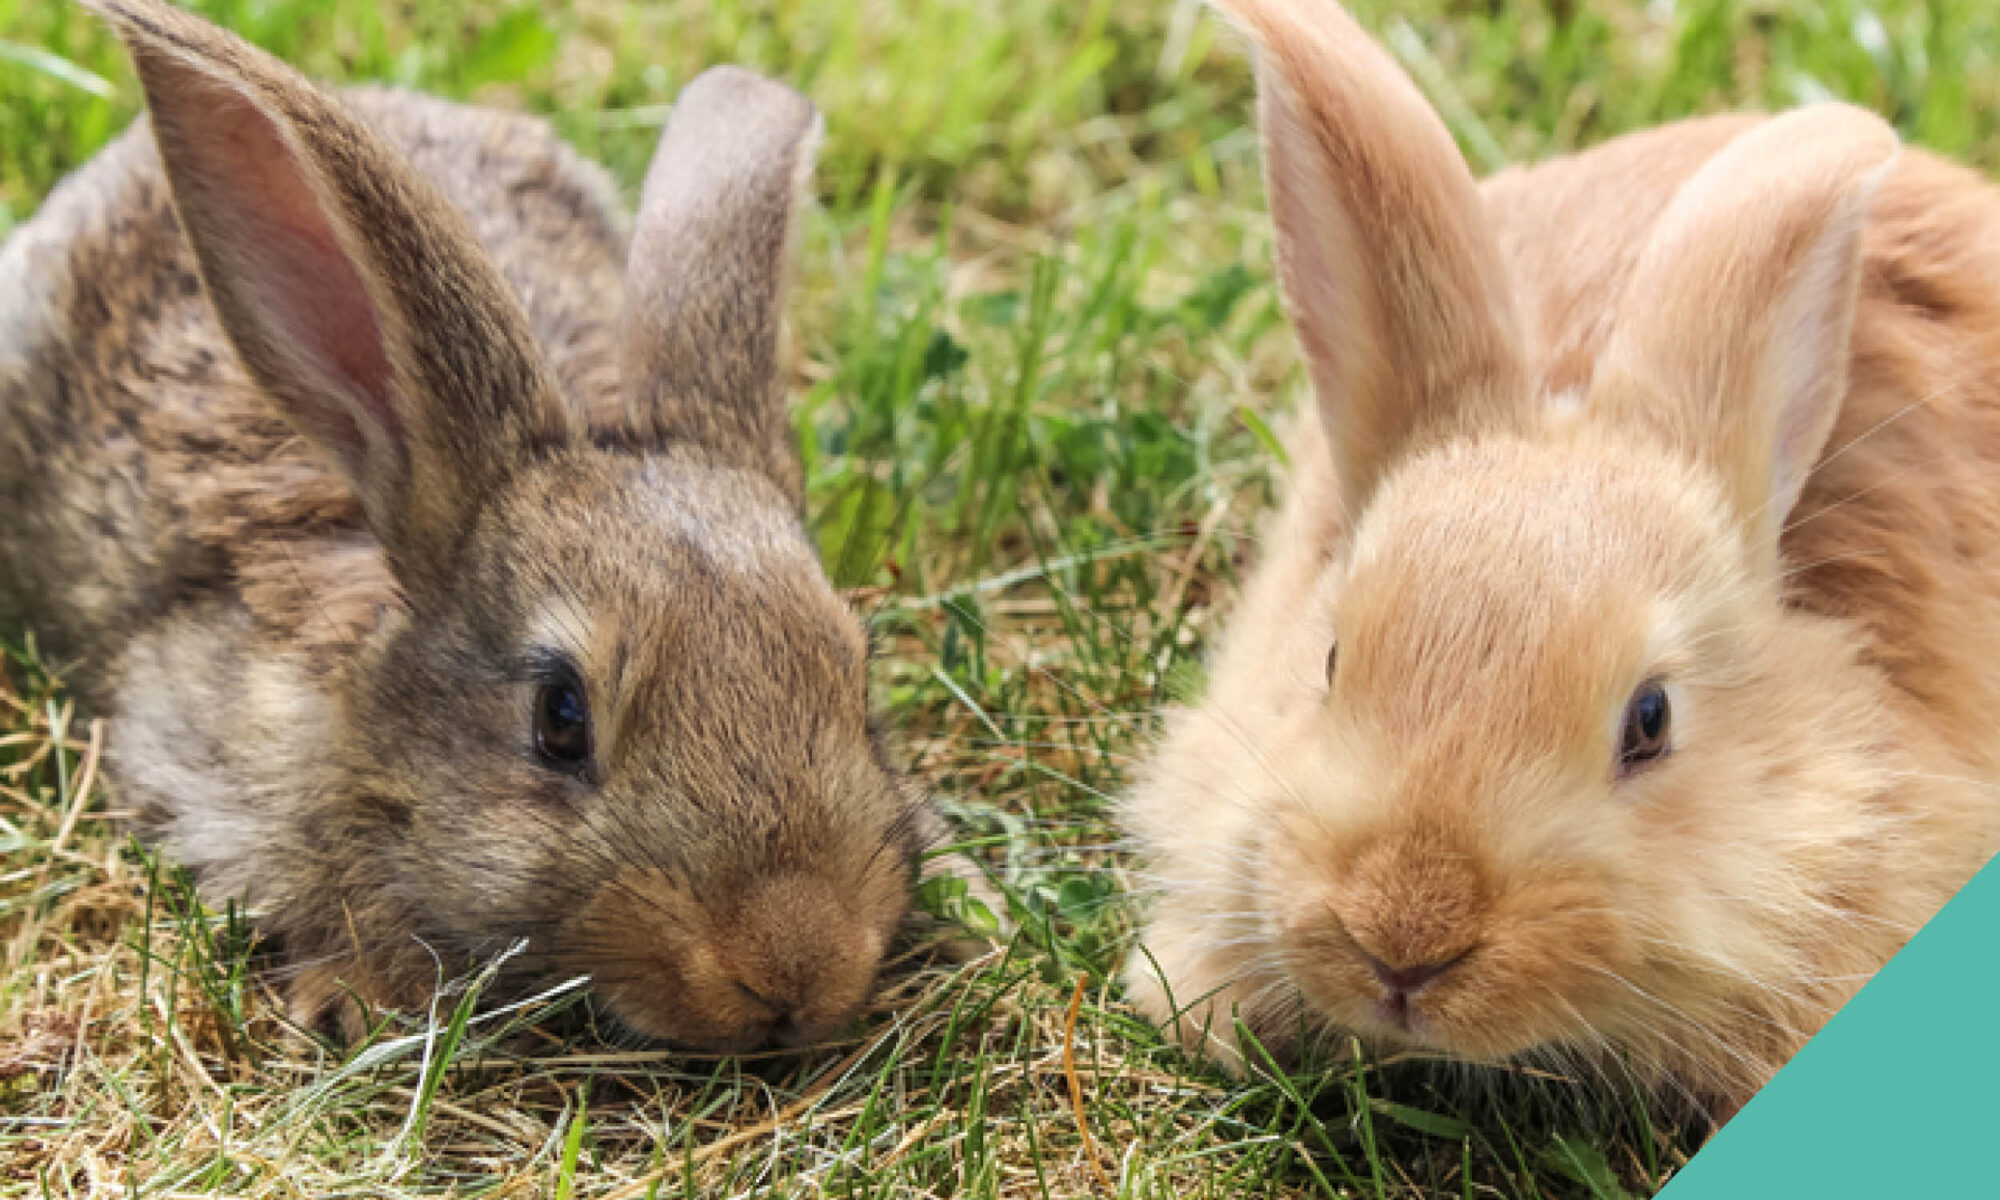 two rabbits sat on grass